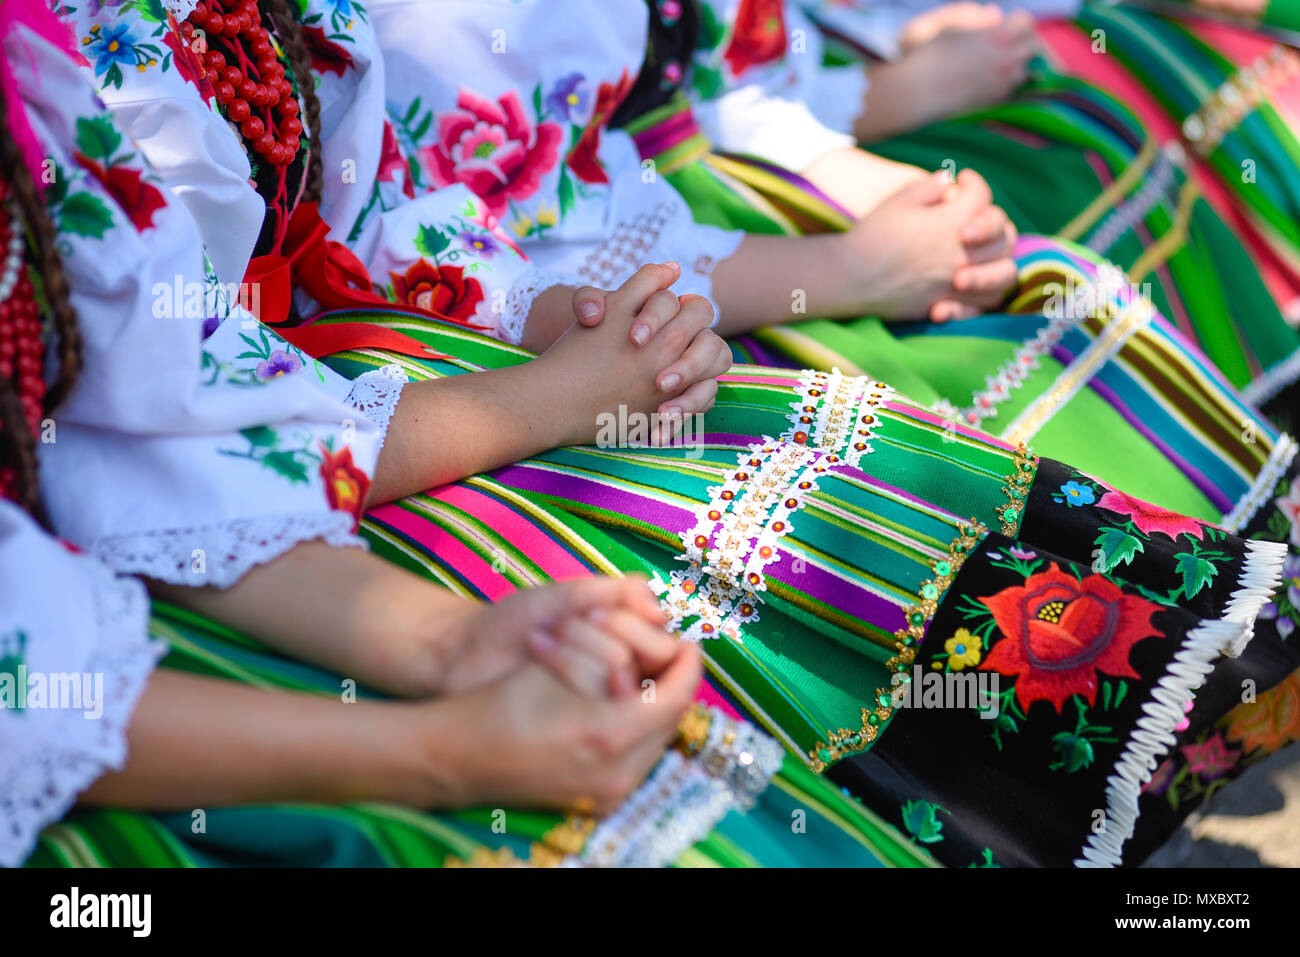 Regional, folklore costumes, colorful handmade skirts with stripes and symbols embroidered. During Corpus Christi parade. Stock Photo